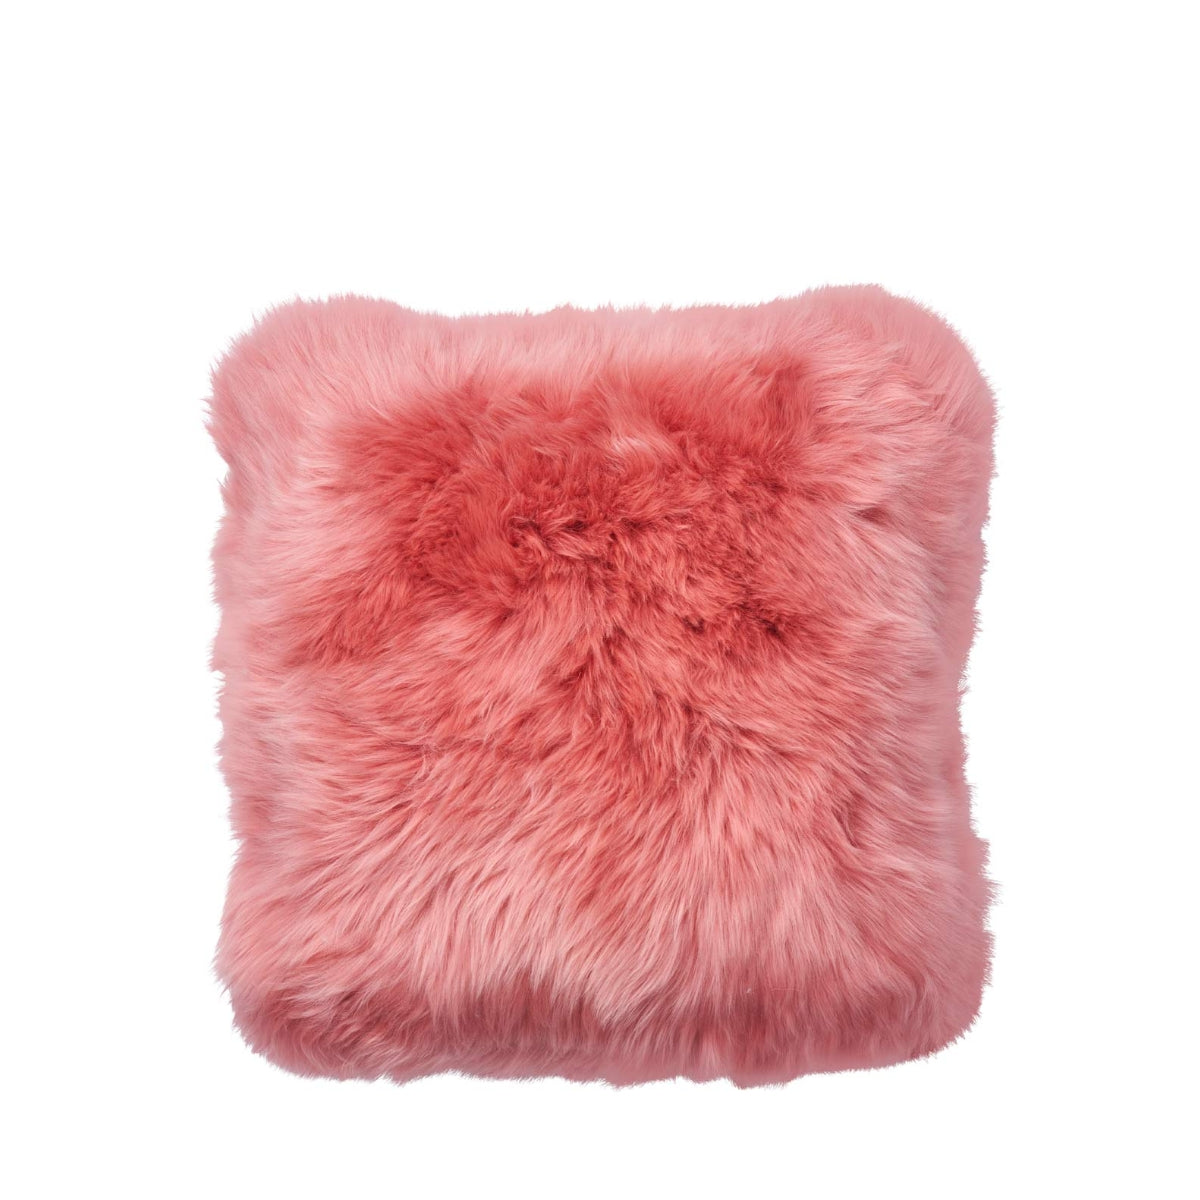 Natures Collection | Coral Collection Cushion – Long Wool Sheepskin, 45x45